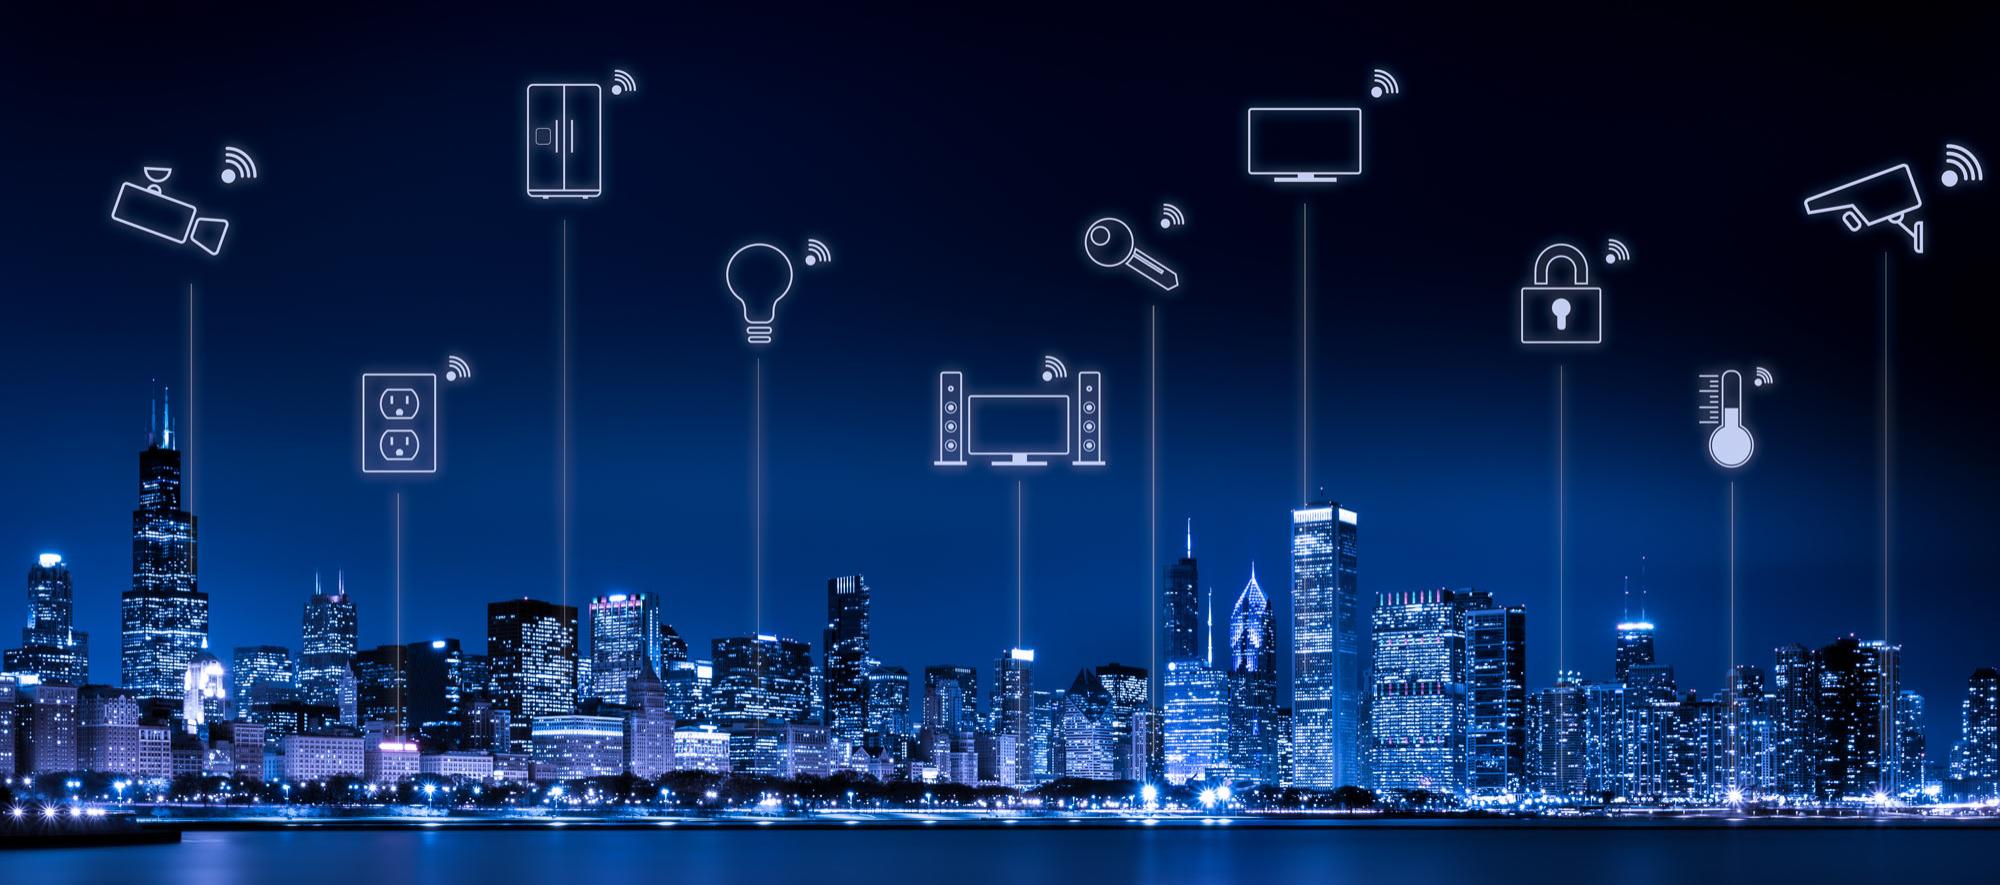 Chicago Skyline with Internet of Things